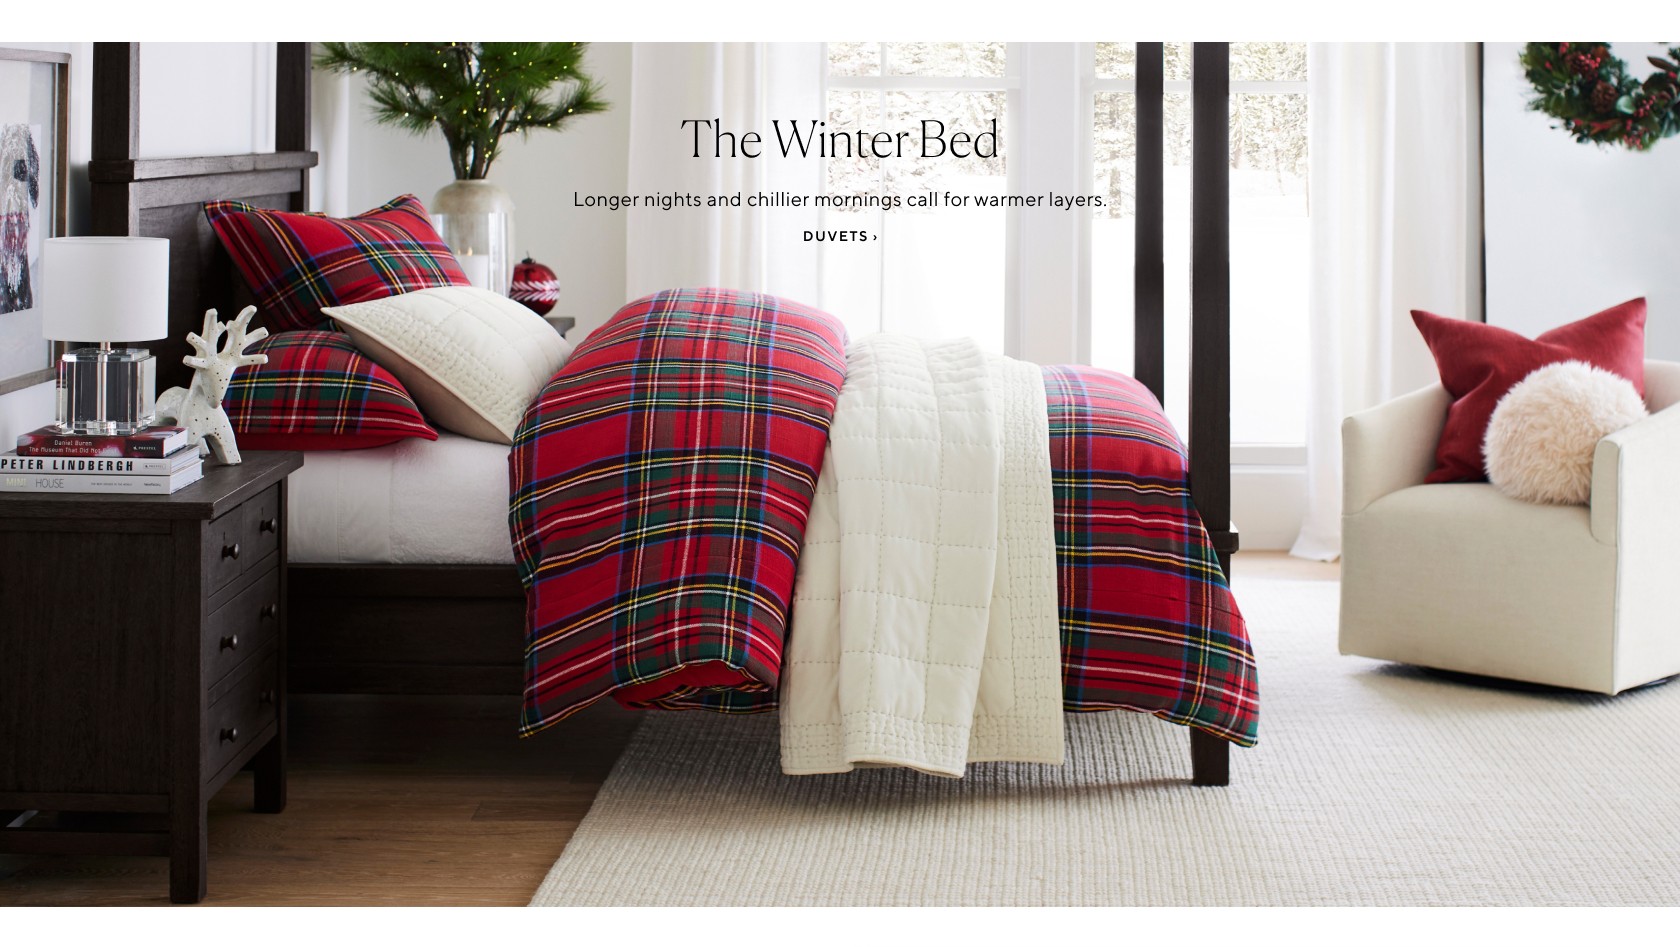 The Winter Bed